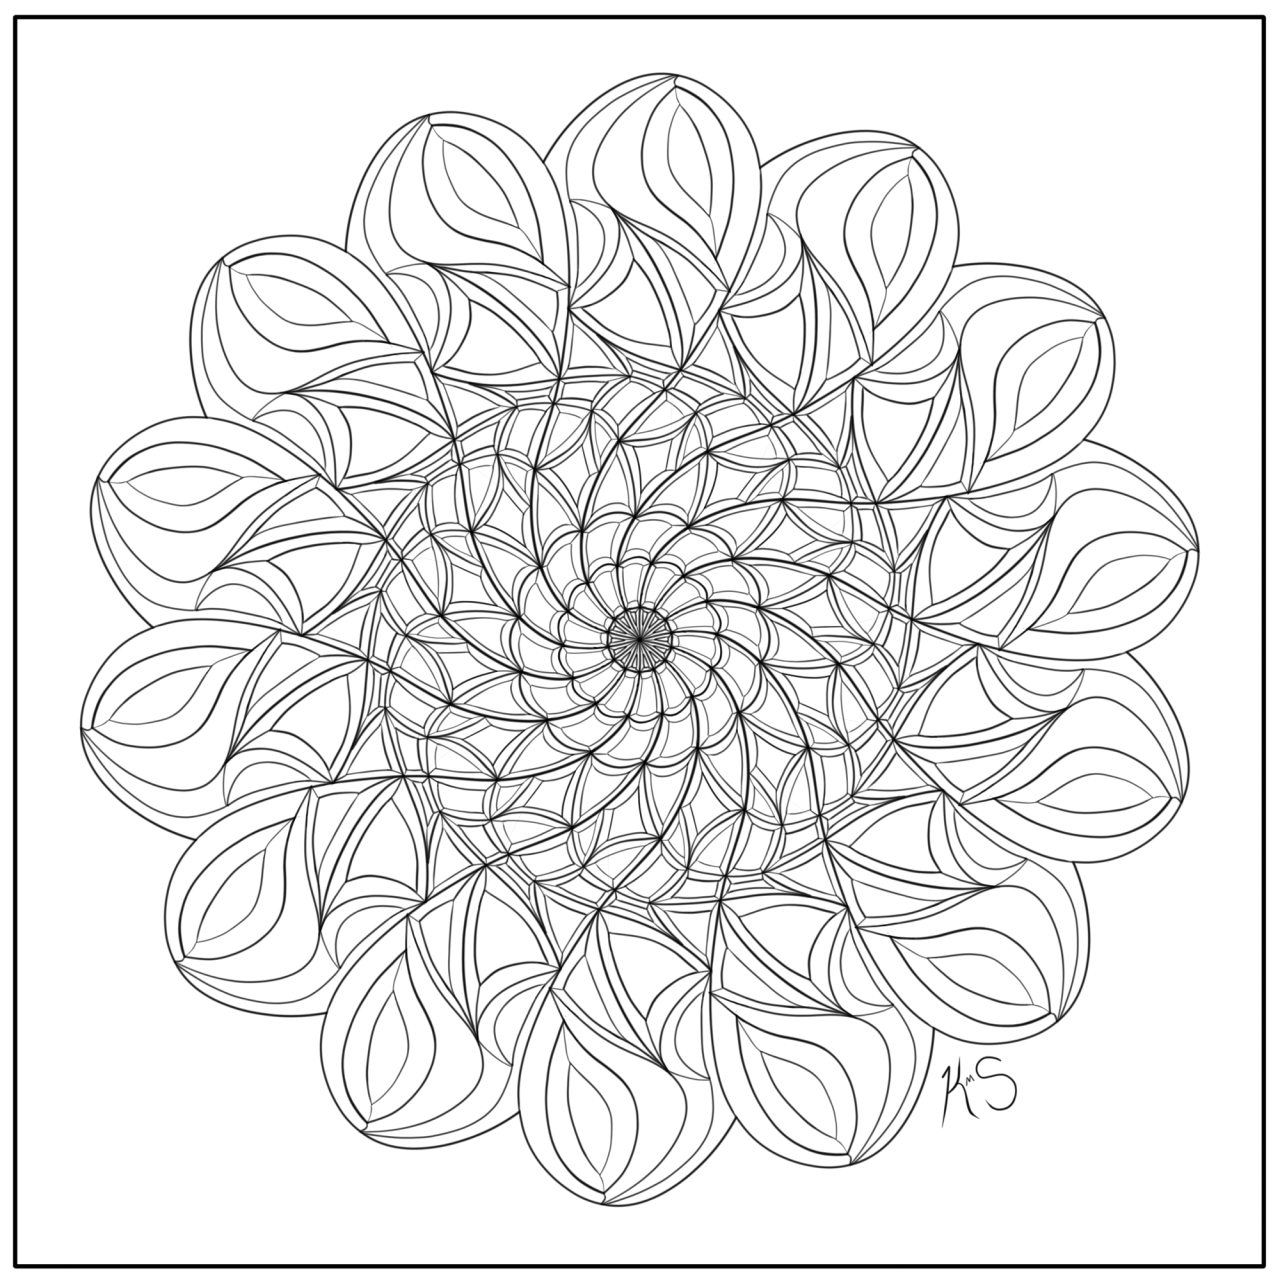 Mandala Relaxation Coloring Page